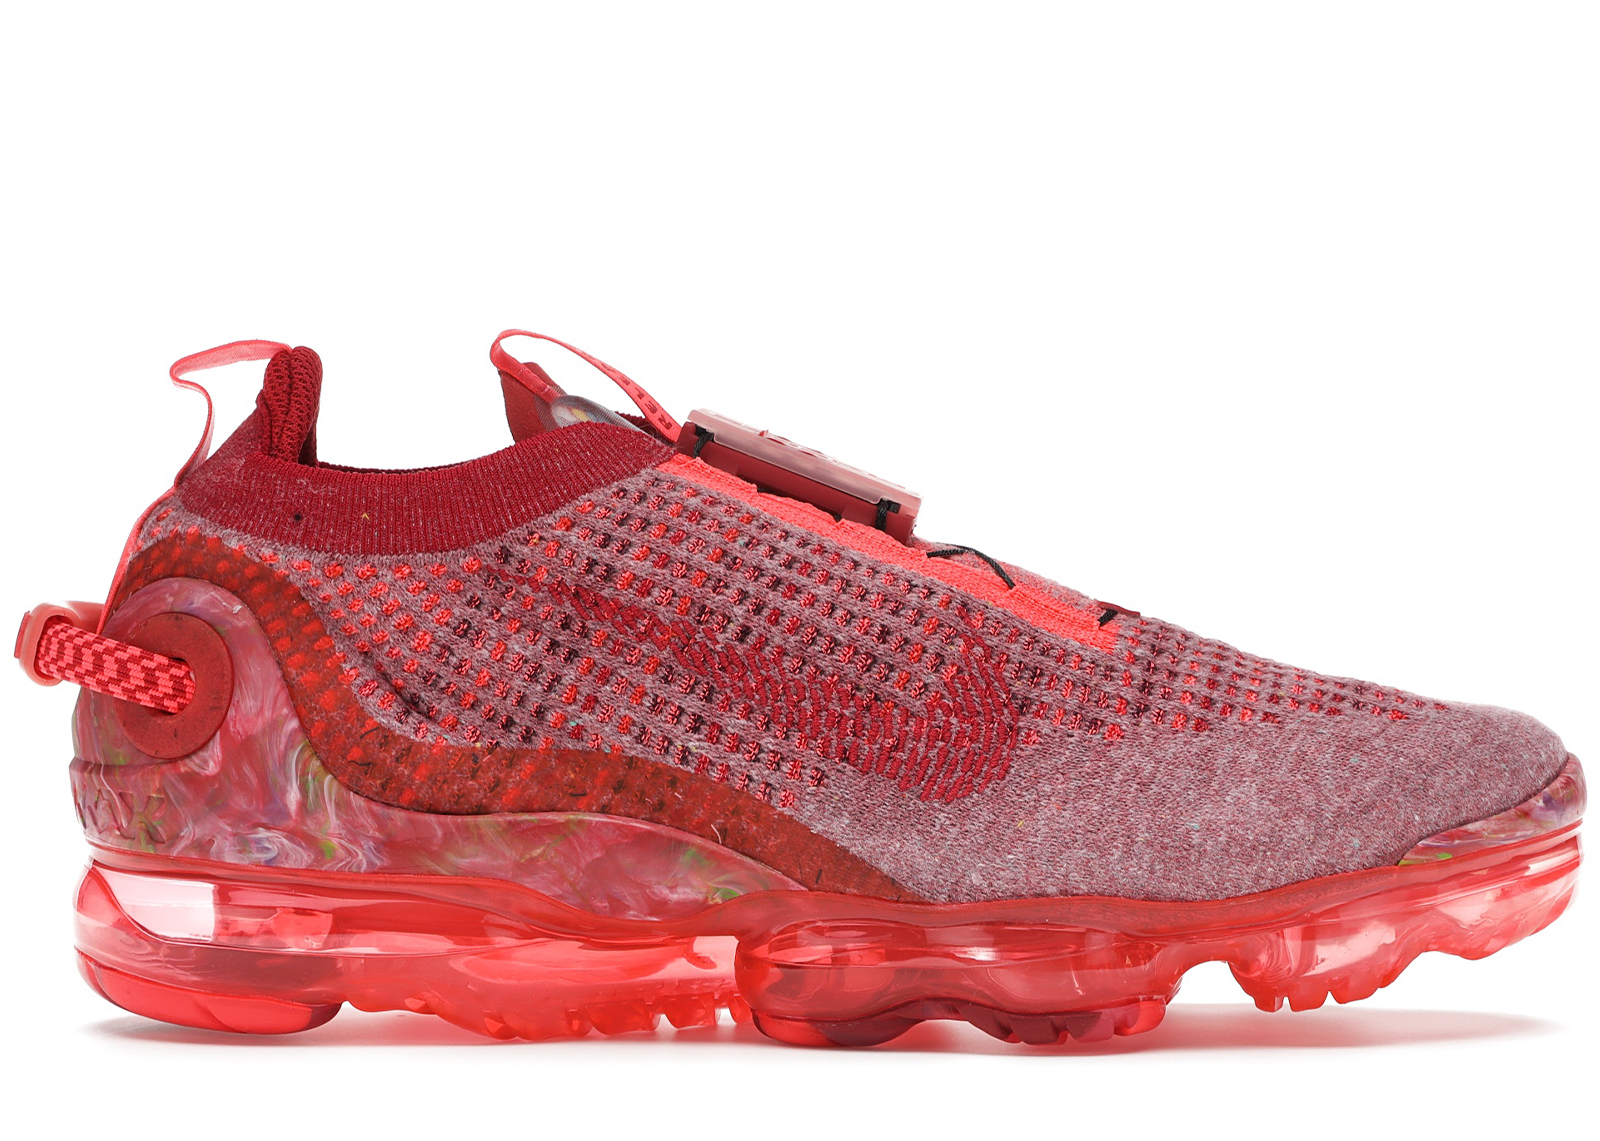 Buy Nike Air Max VaporMax Size 8 Shoes & New Sneakers - StockX